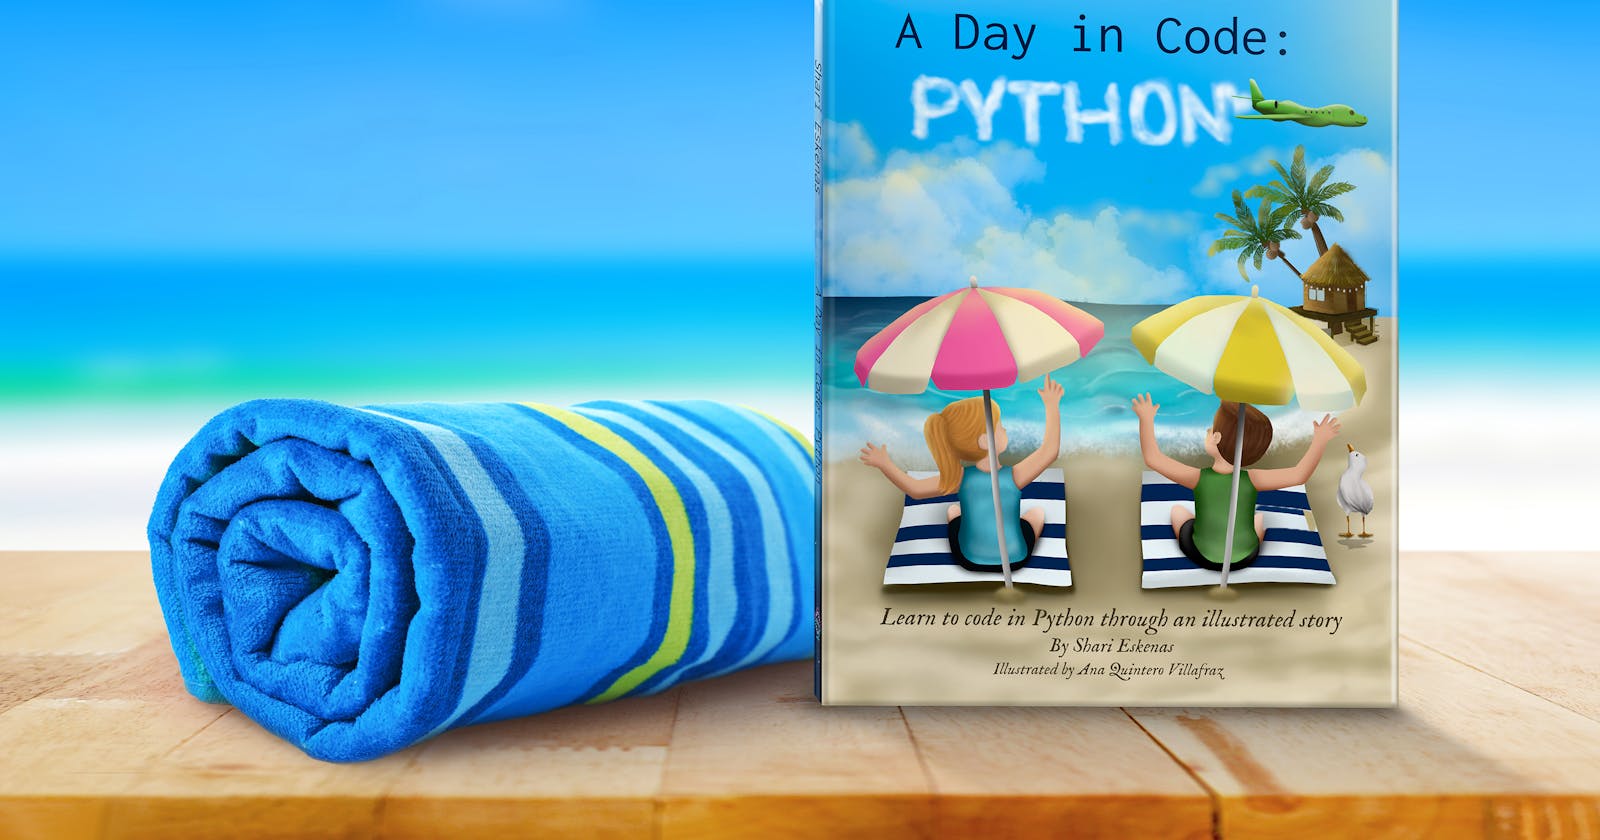 A picture book written in Python code